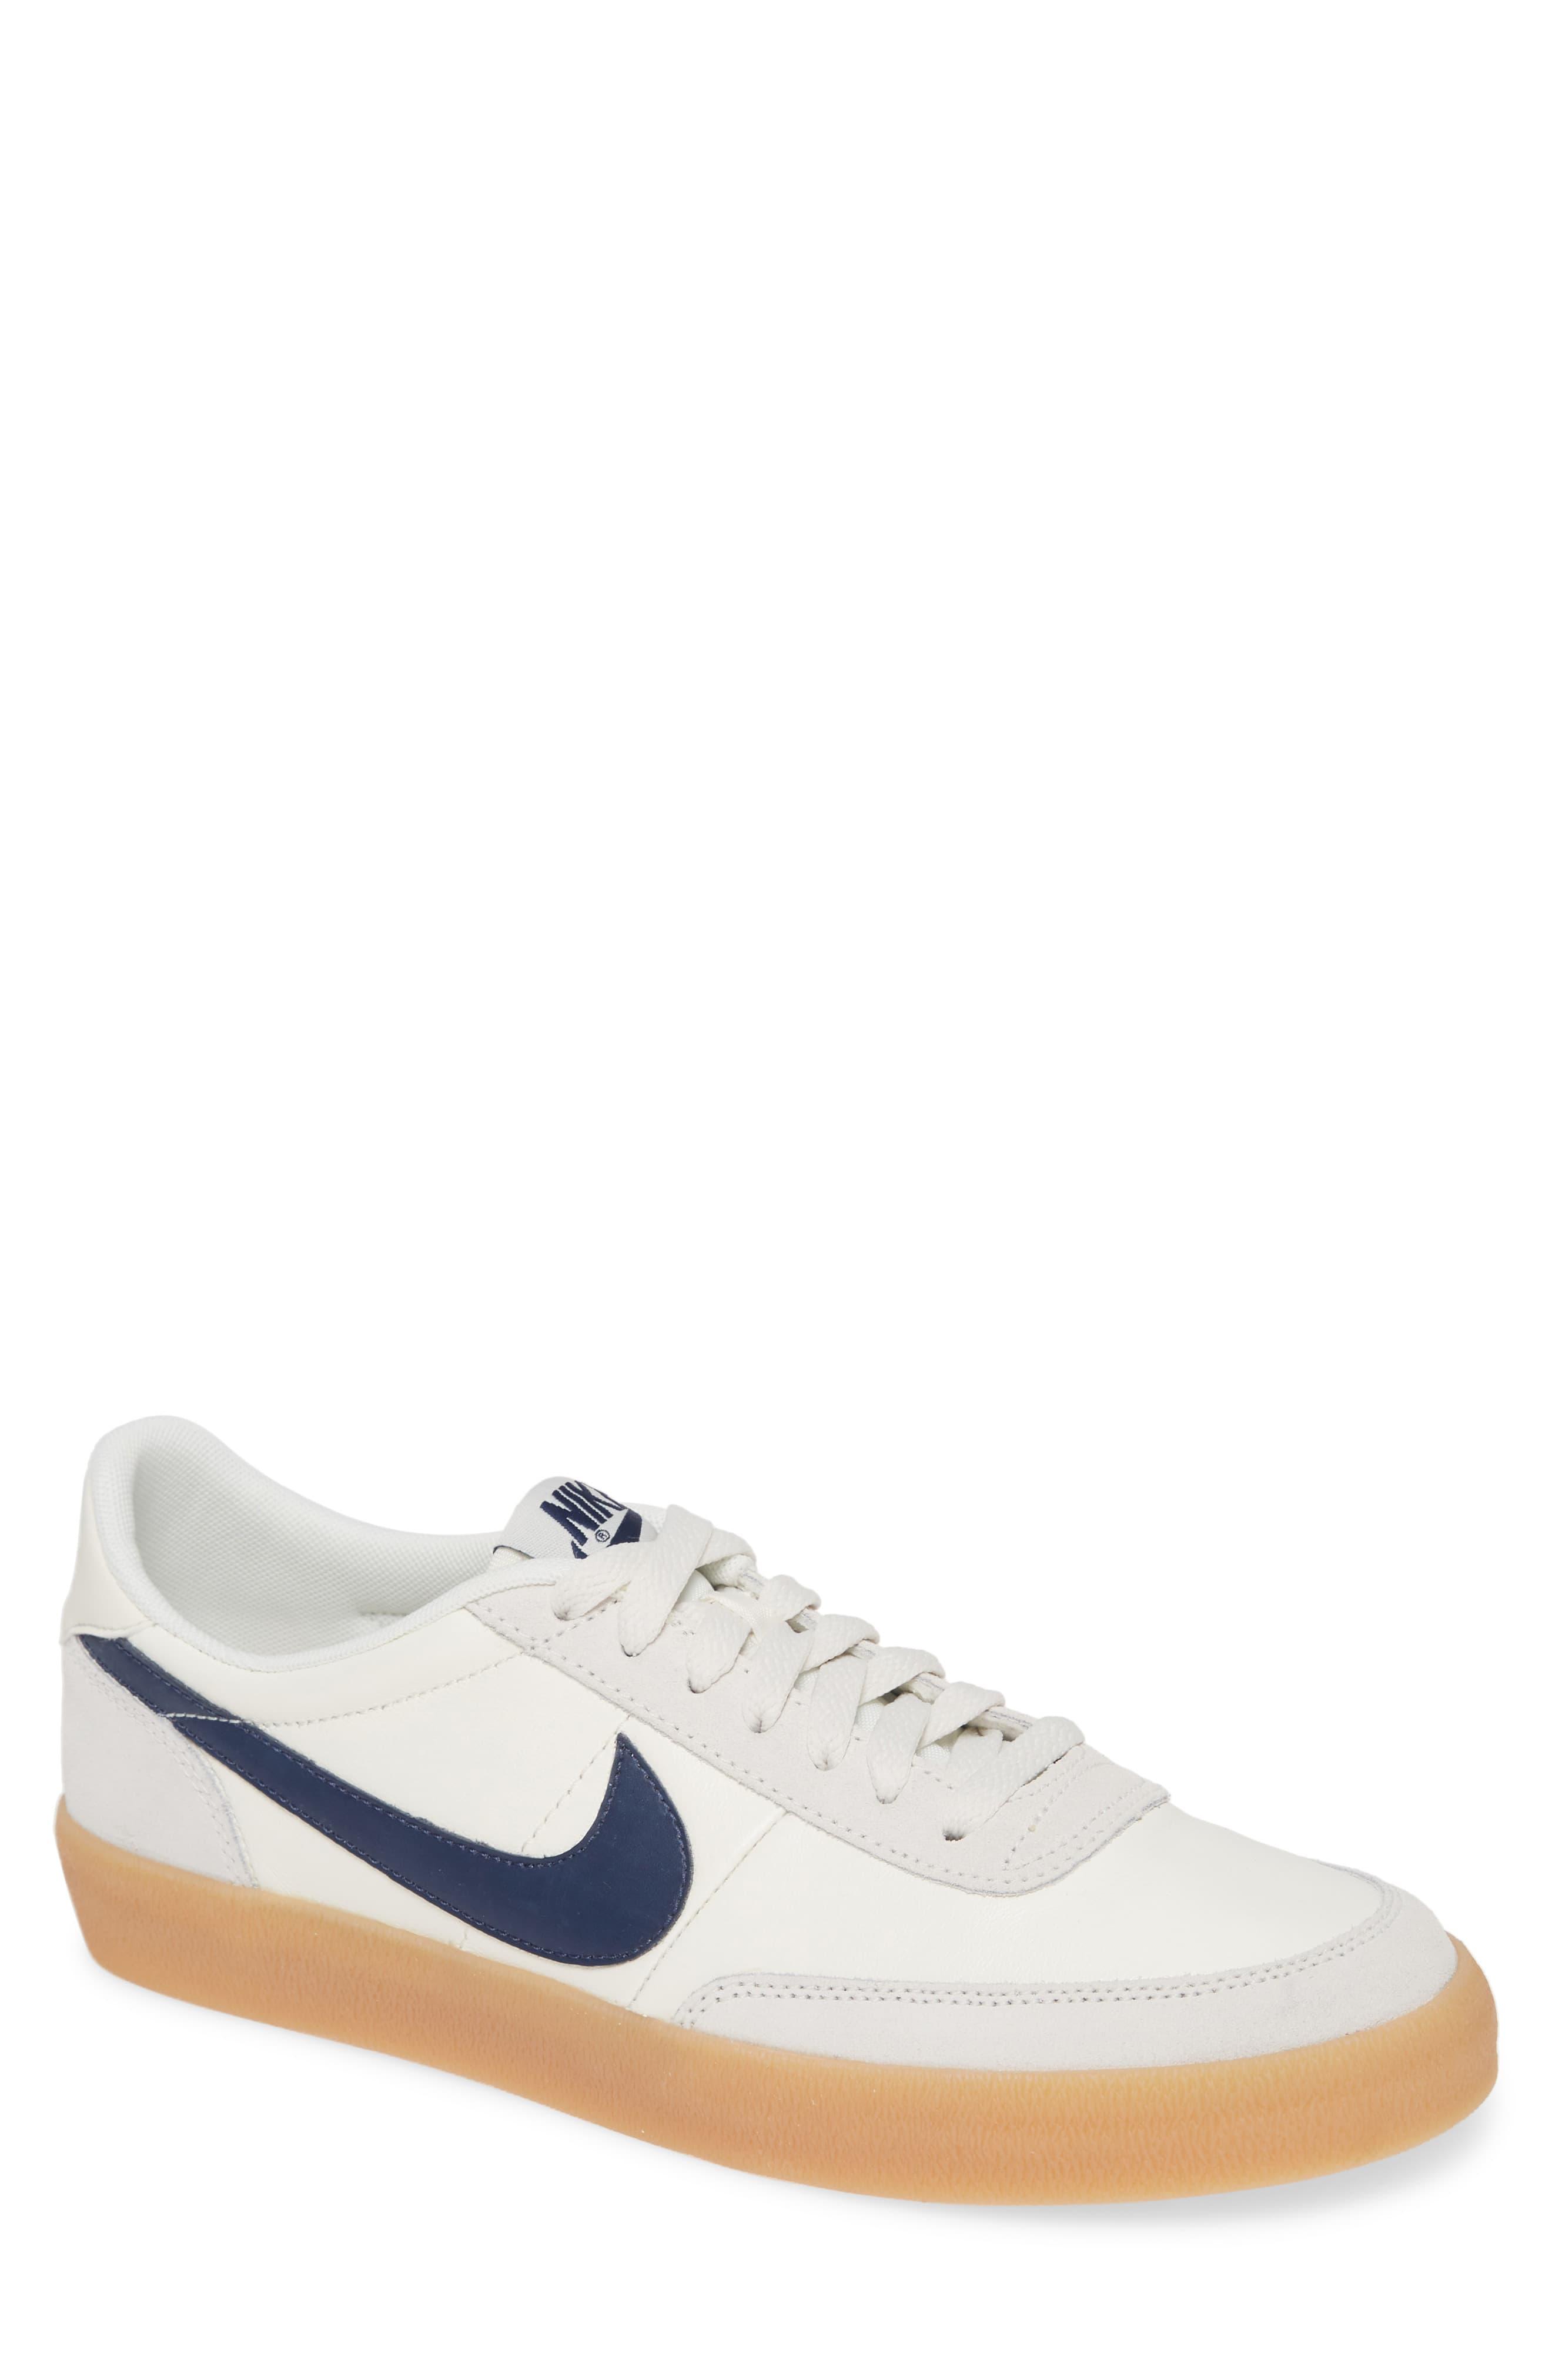 Nike Killshot 2 Leather Shoes - Size 9.5 in Blue for Men - Save 56% - Lyst